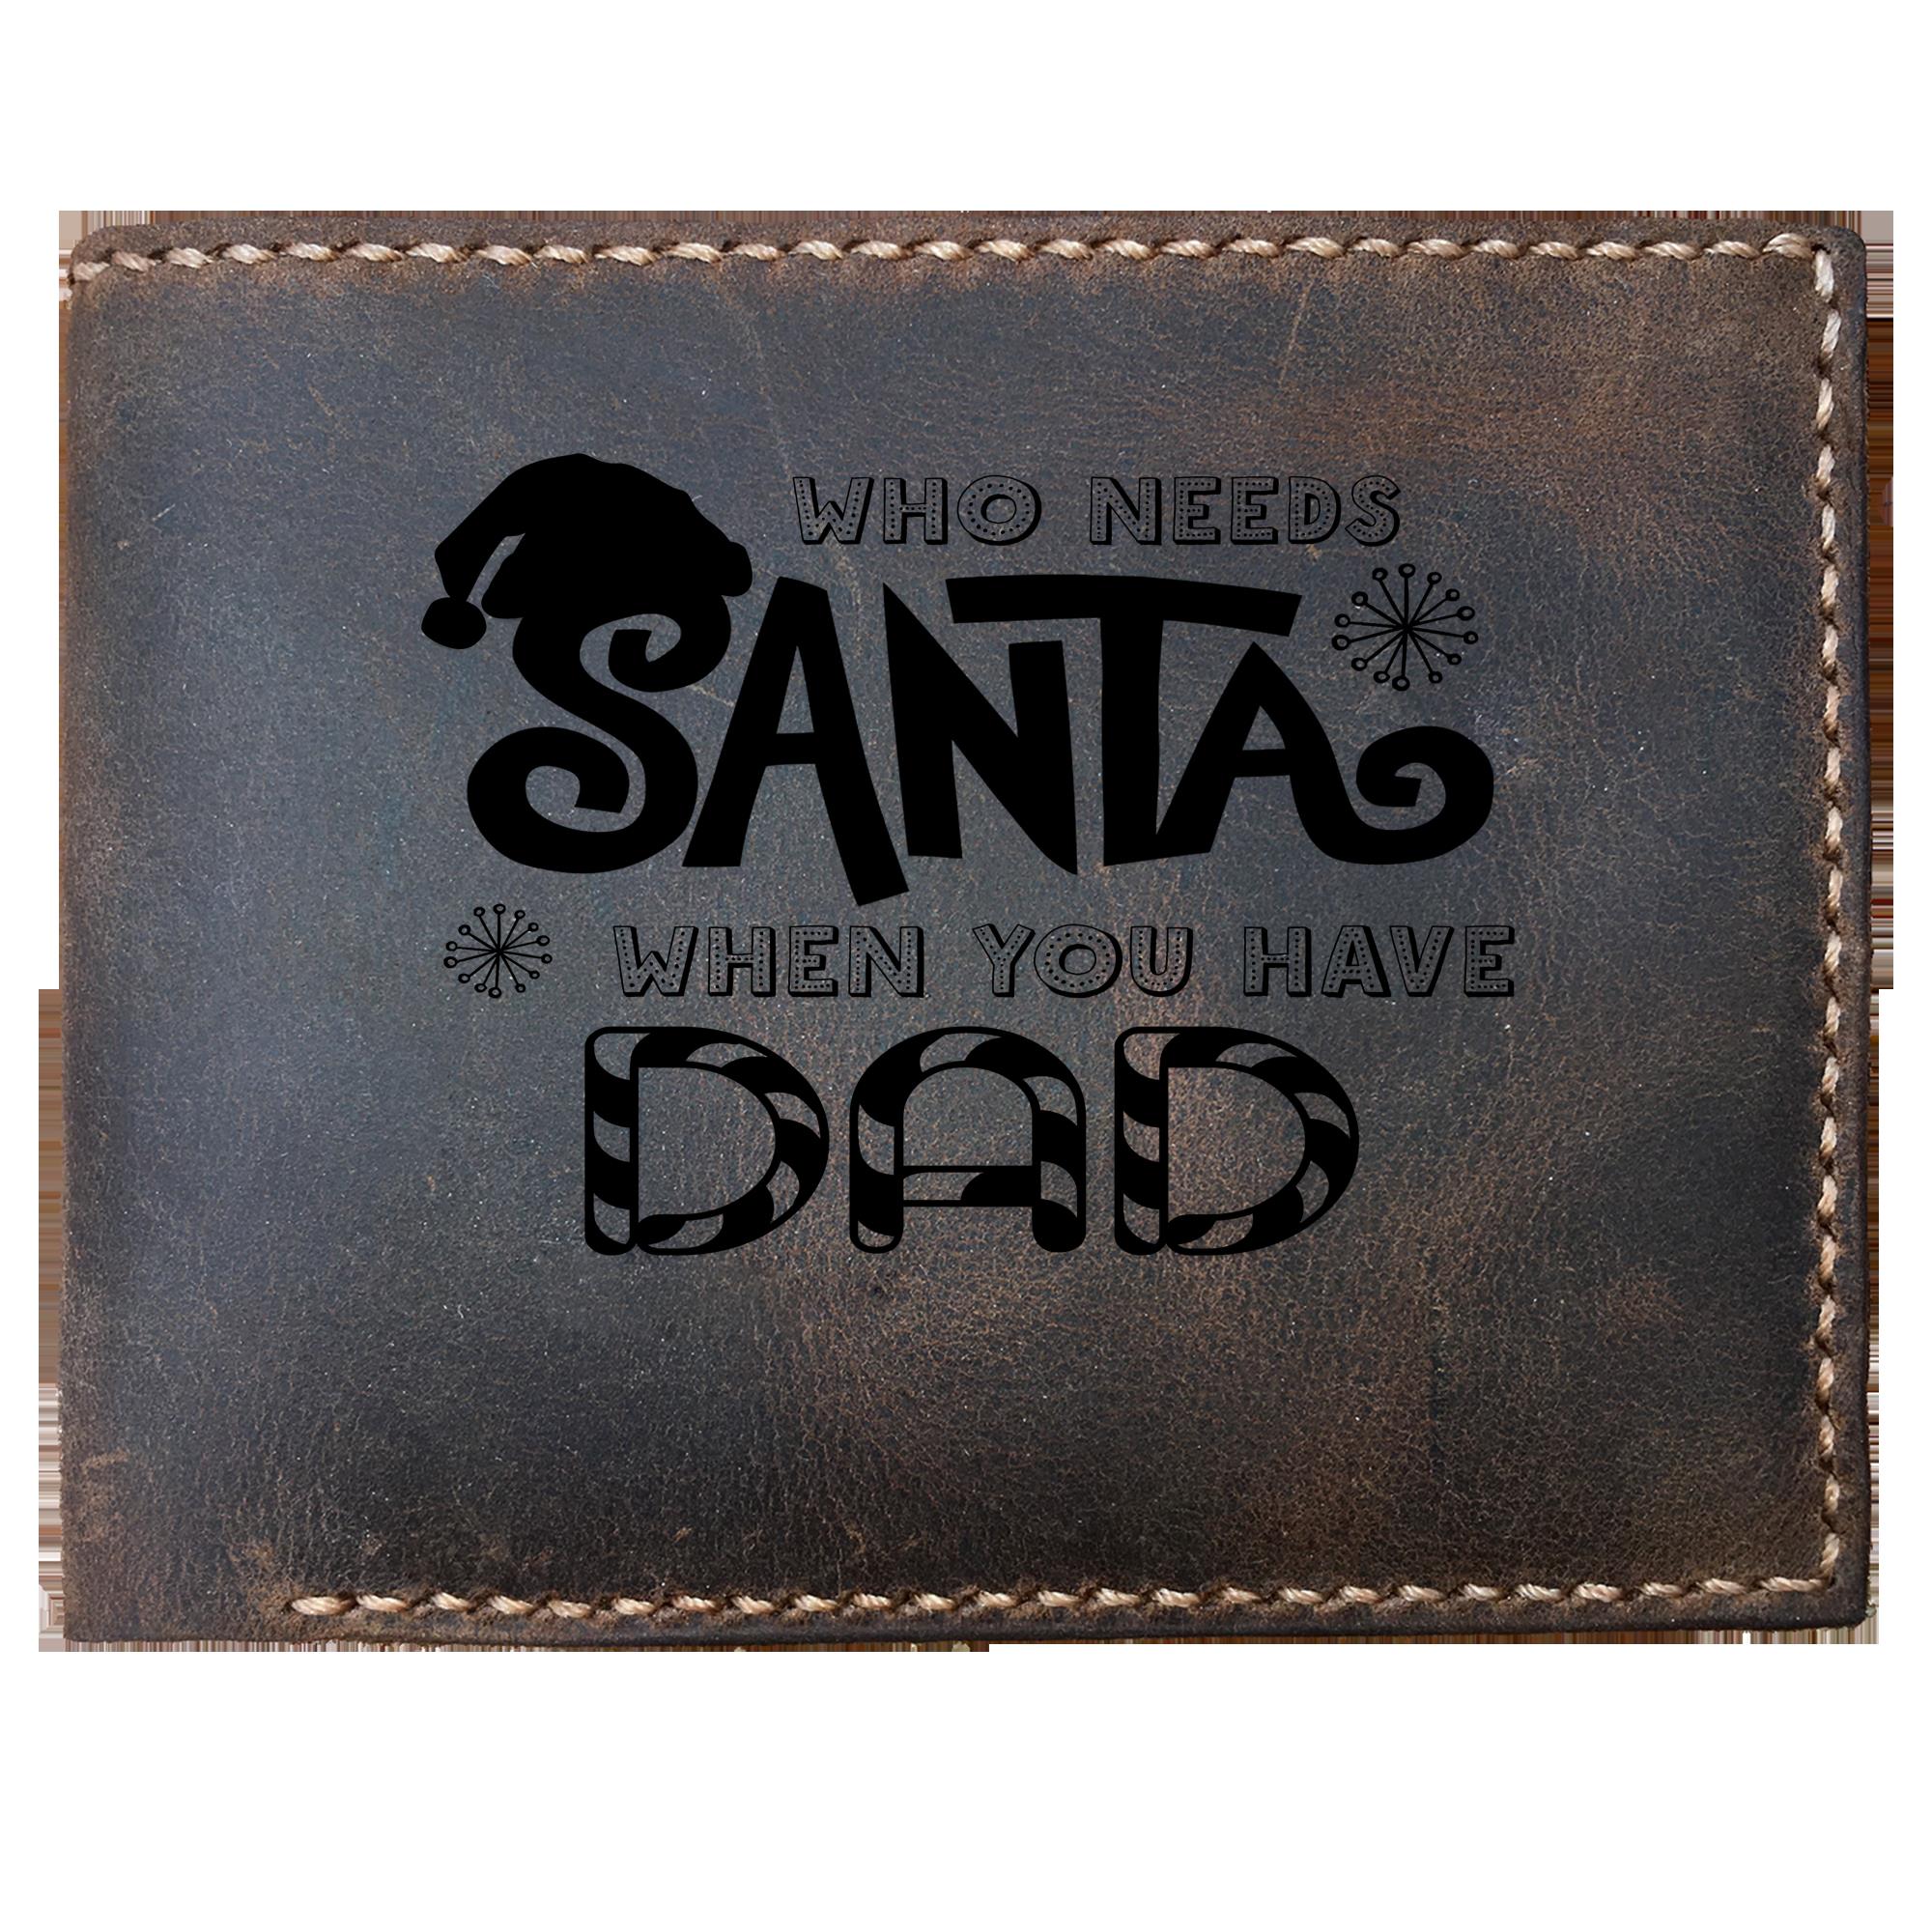 Skitongifts Funny Custom Laser Engraved Bifold Leather Wallet For Men, Who Needs Santa When You Have Dad Funny Christmas